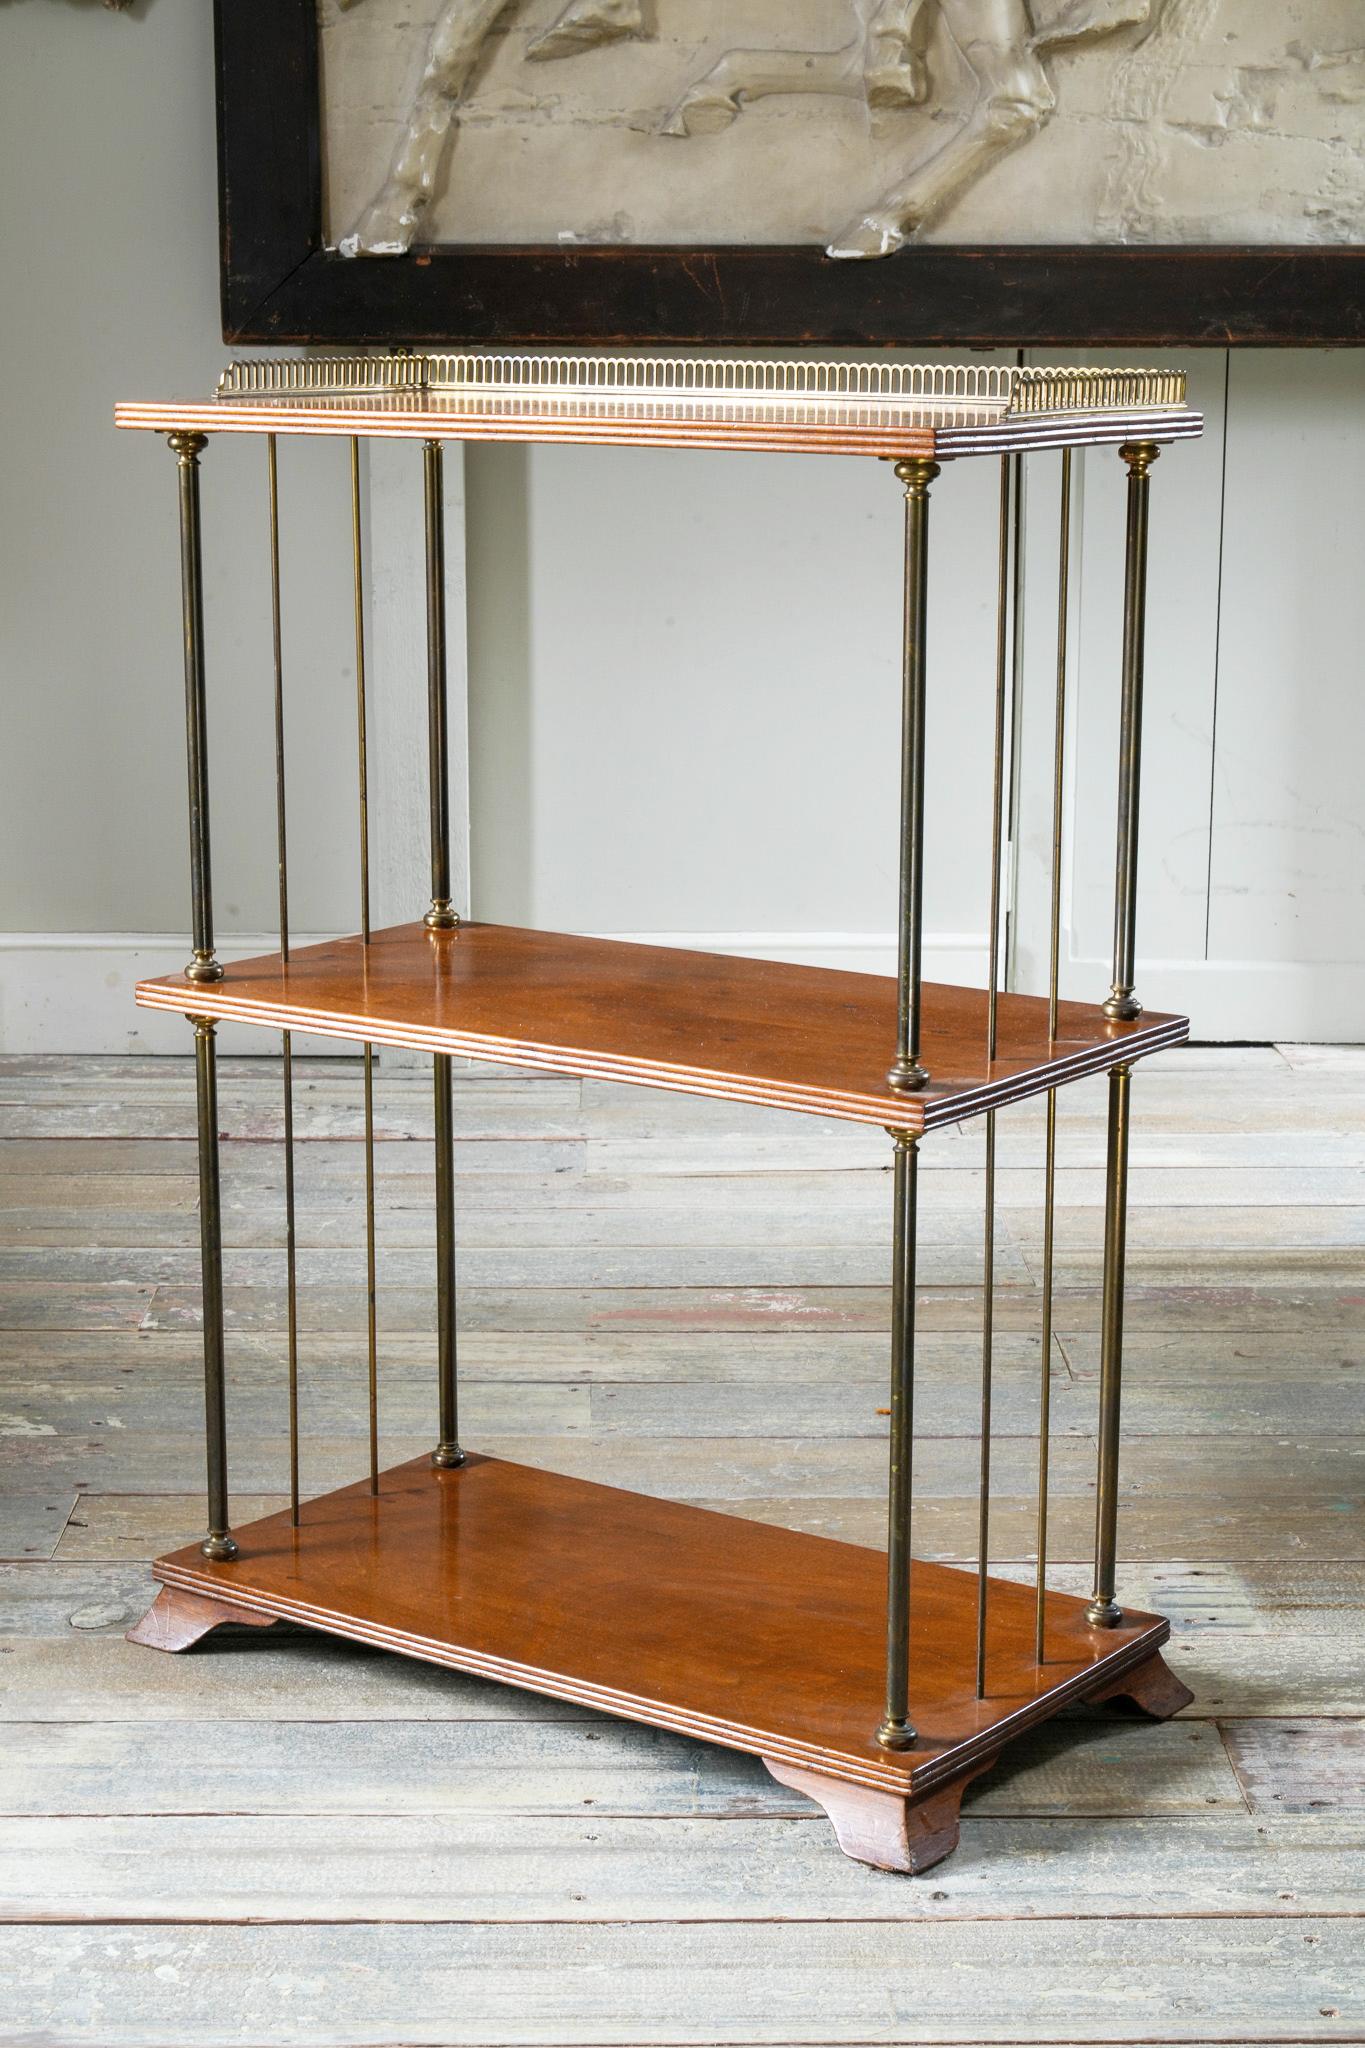 An unusual freestanding etagere in untouched original condition.